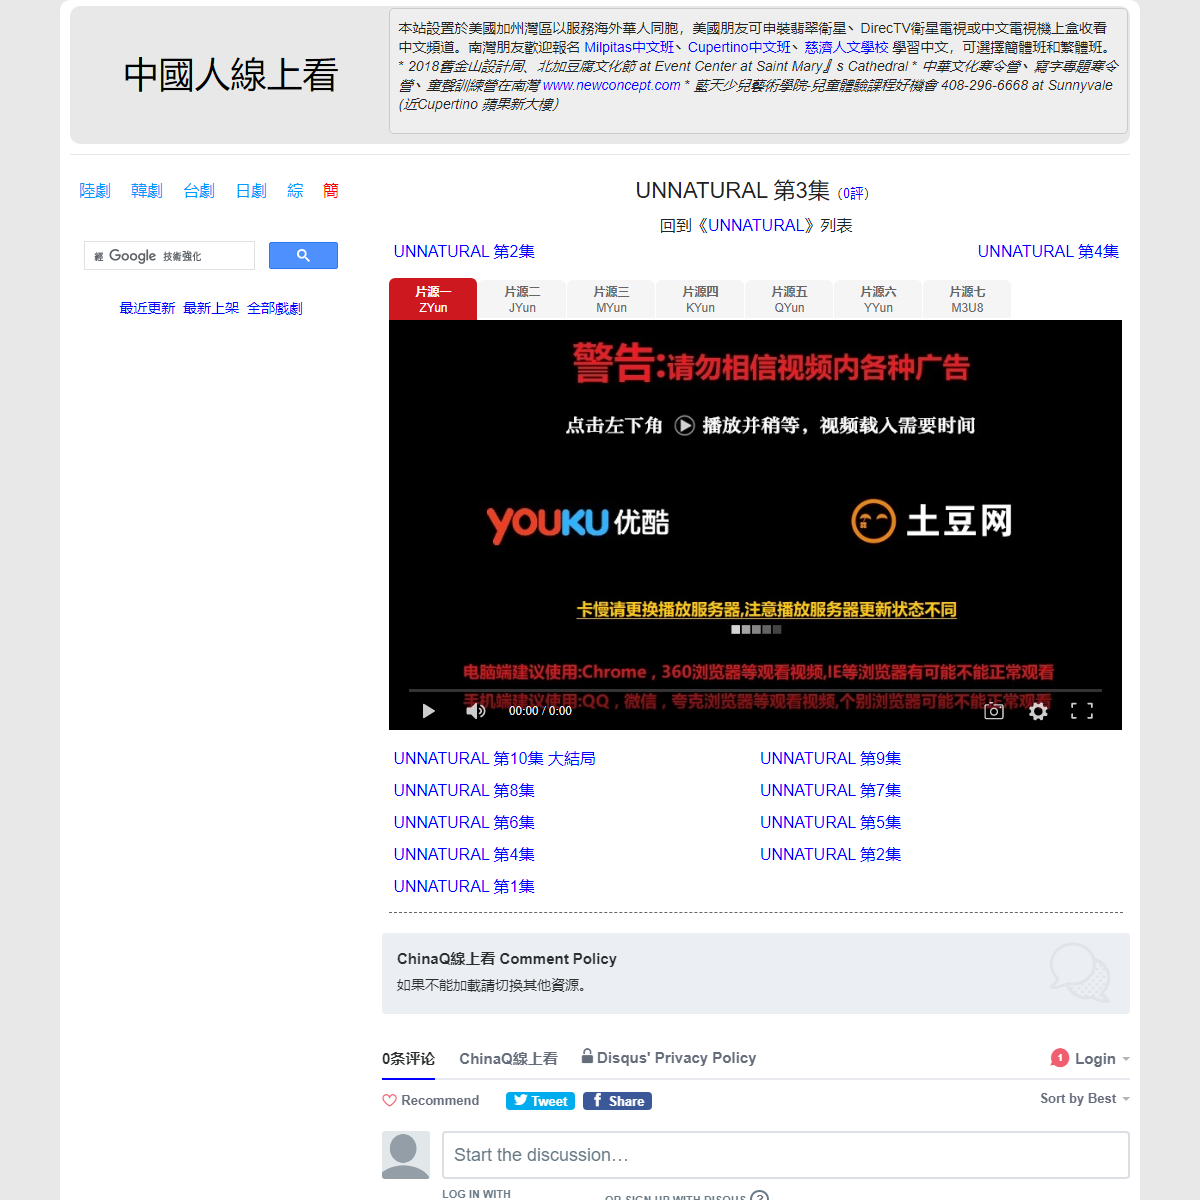 A complete backup of https://chinaq.tv/jp180112/3.html